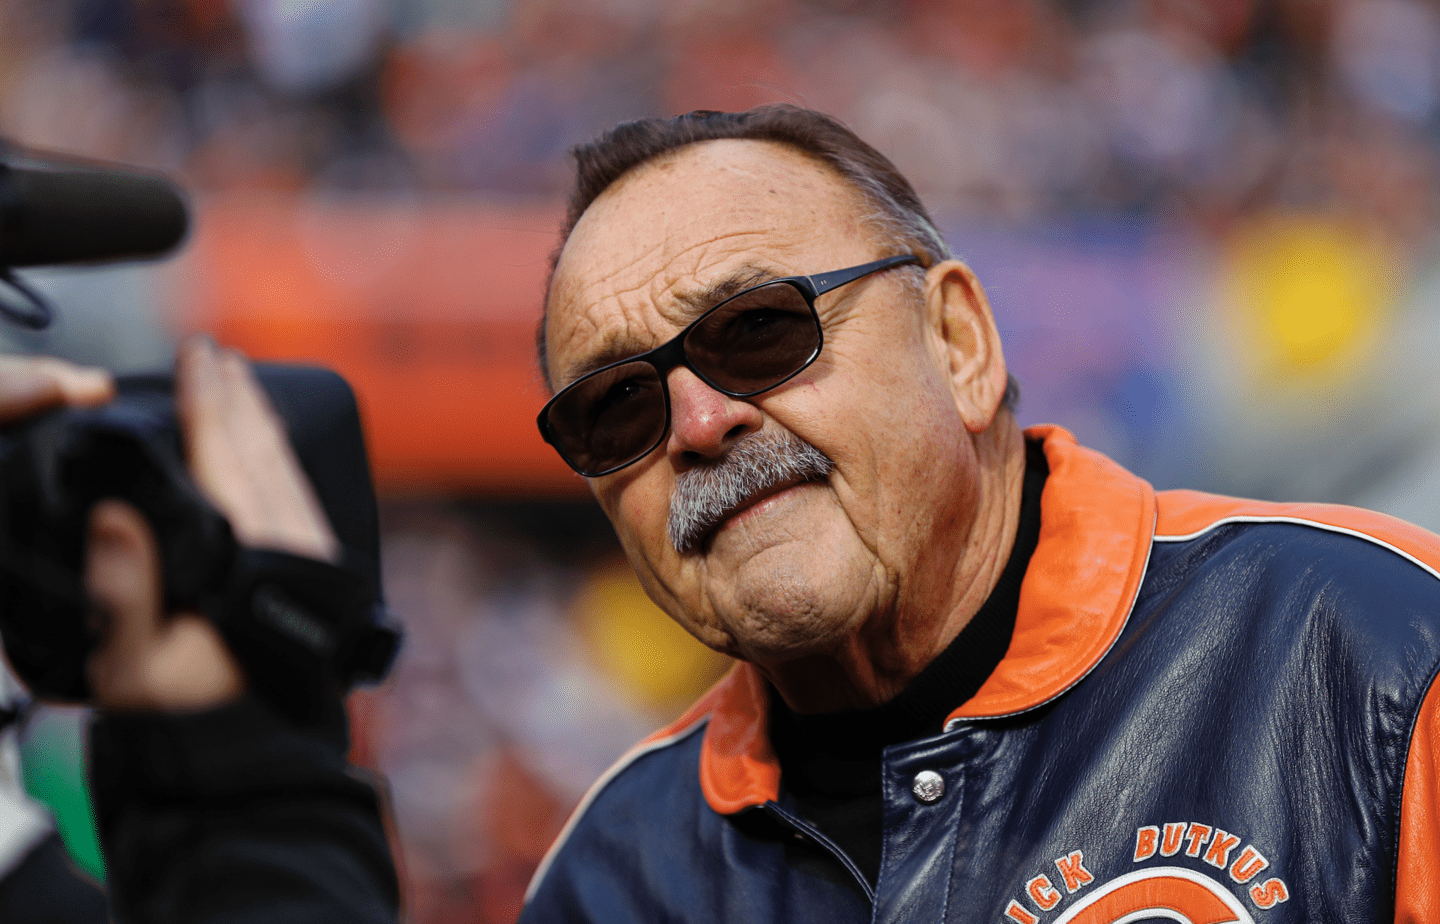 Chicago Bears Hall of Famer Dick Butkus savagely trolled Aaron Rodgers following the QB's lengthy Instagram post of "gratitude" on Tuesday